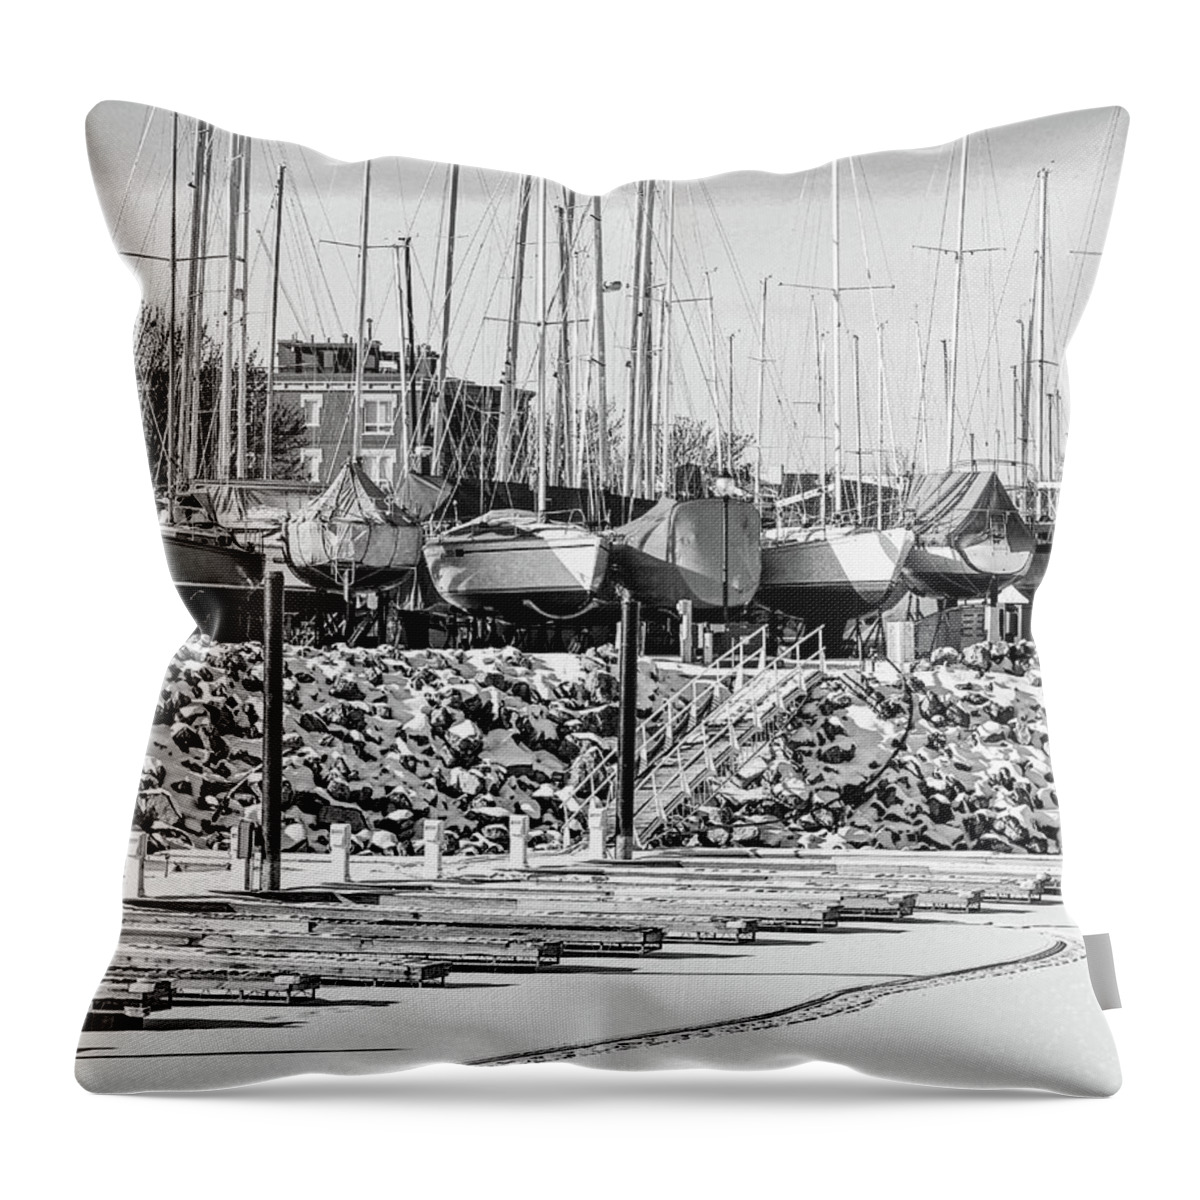 Lake Pepin Throw Pillow featuring the photograph Winter Season by Susie Loechler